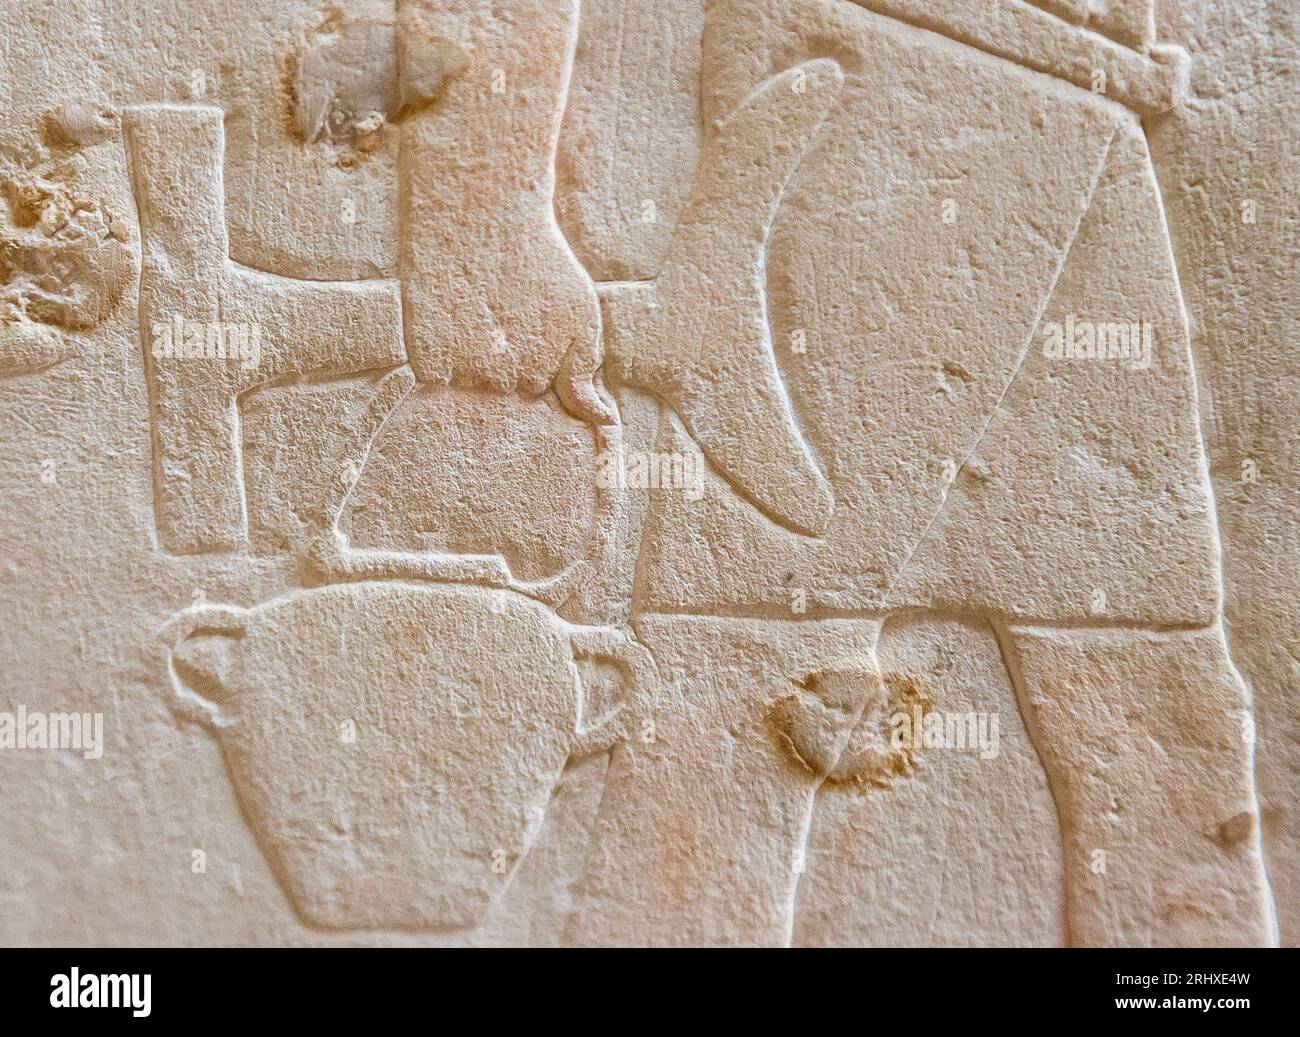 Egypt, Saqqara, tomb of Ankhmahor, procession of offering bringers. Vase and headrest. Stock Photo